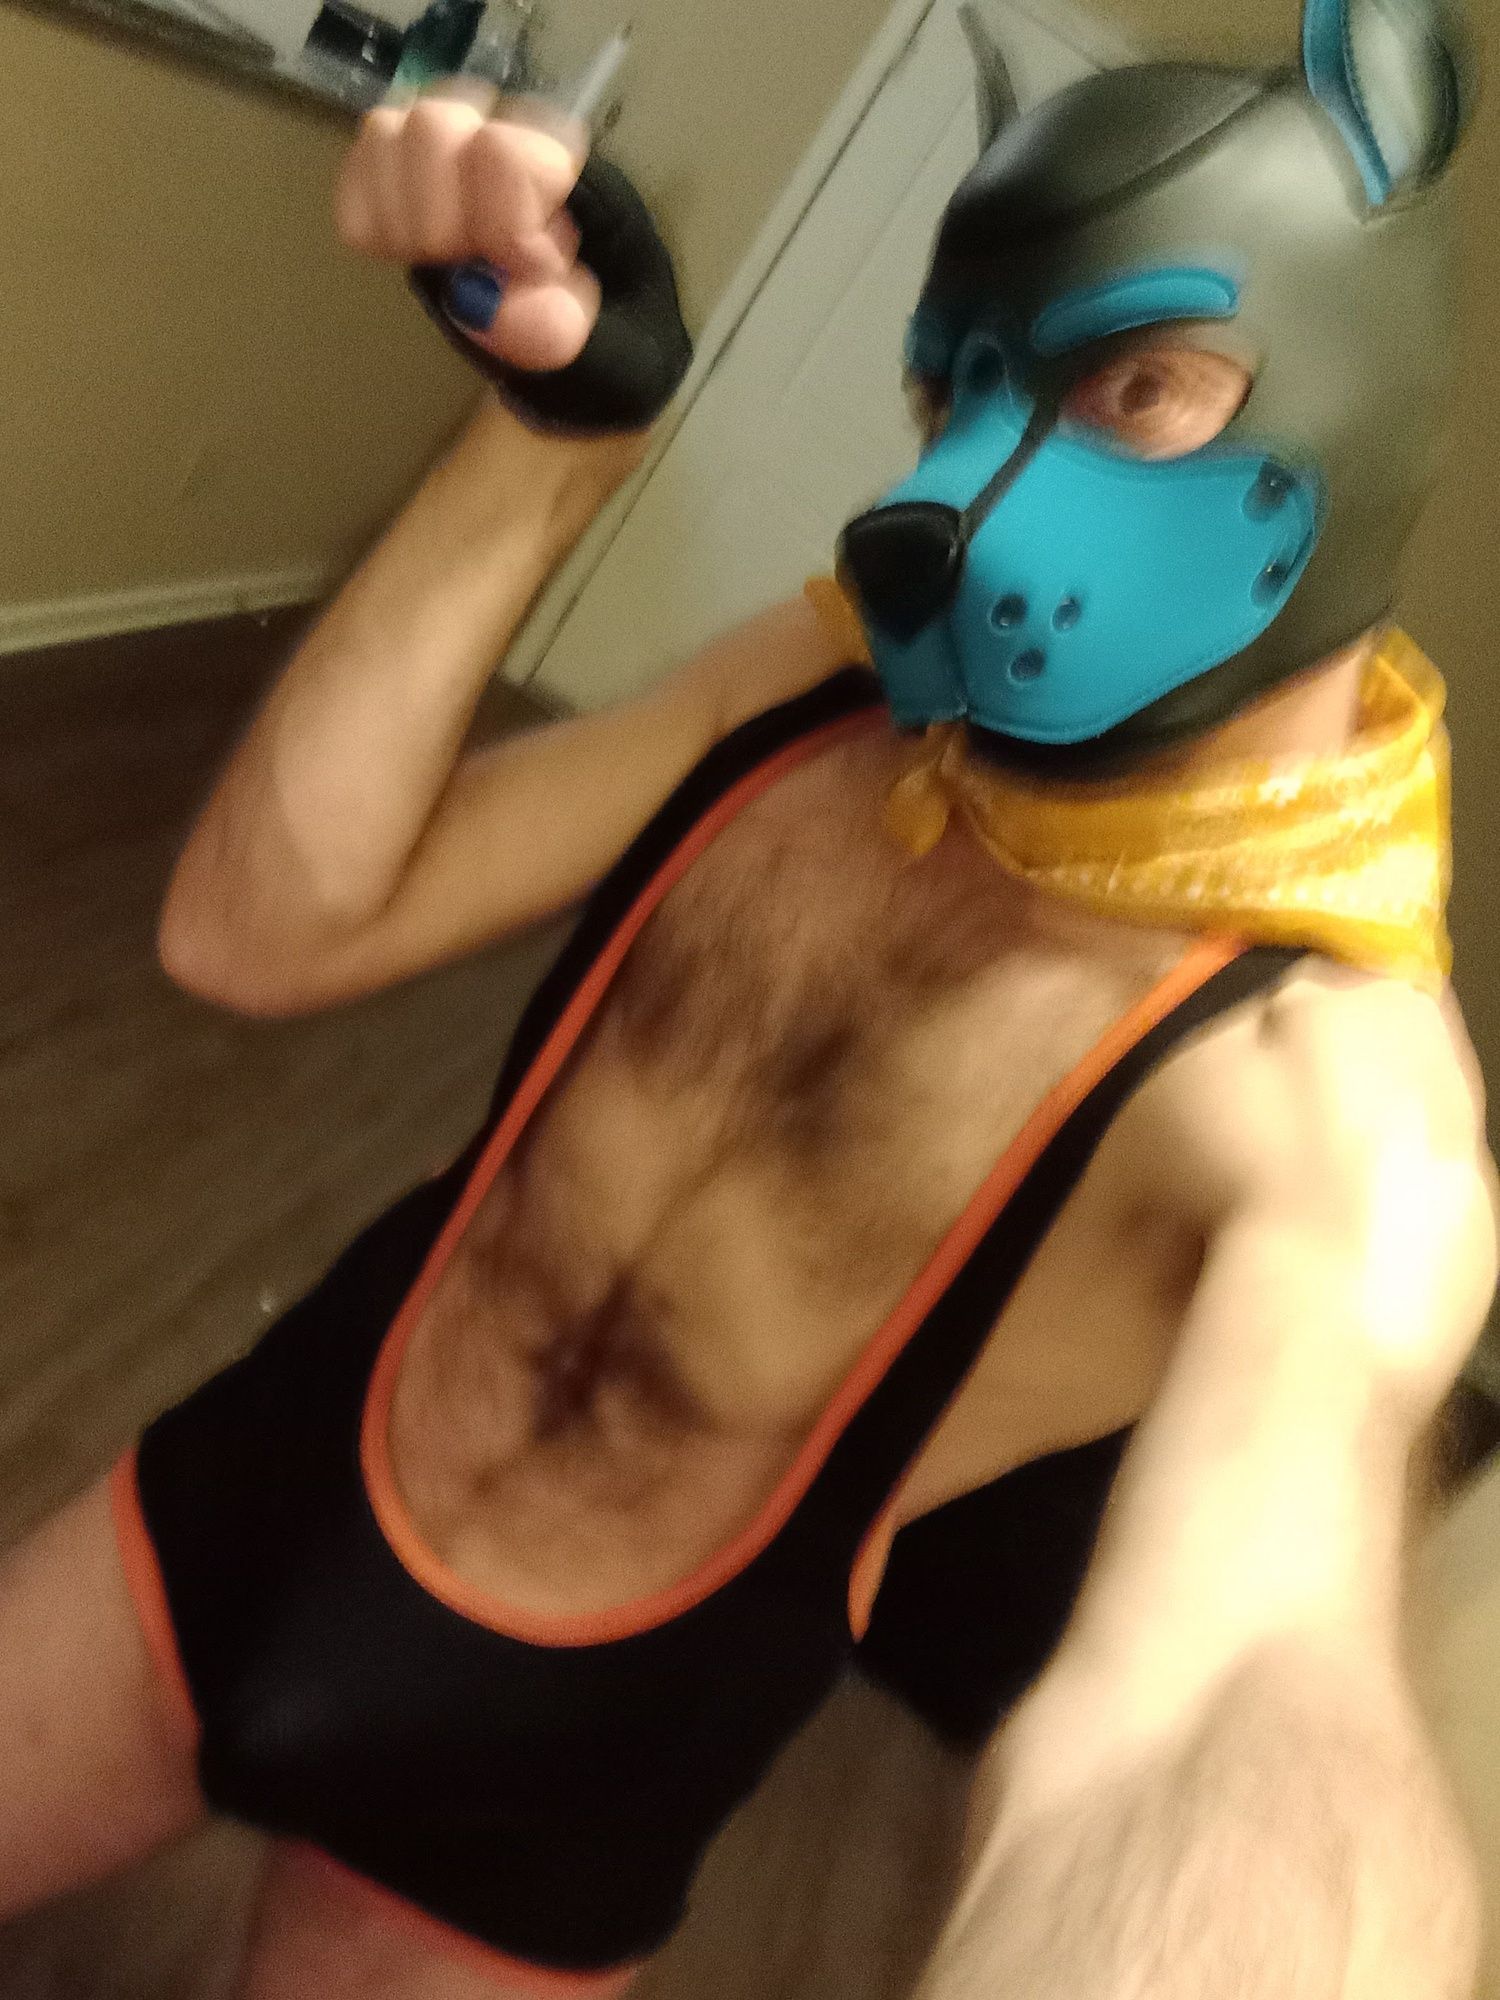 Puppers Showing off in underwear...again #30